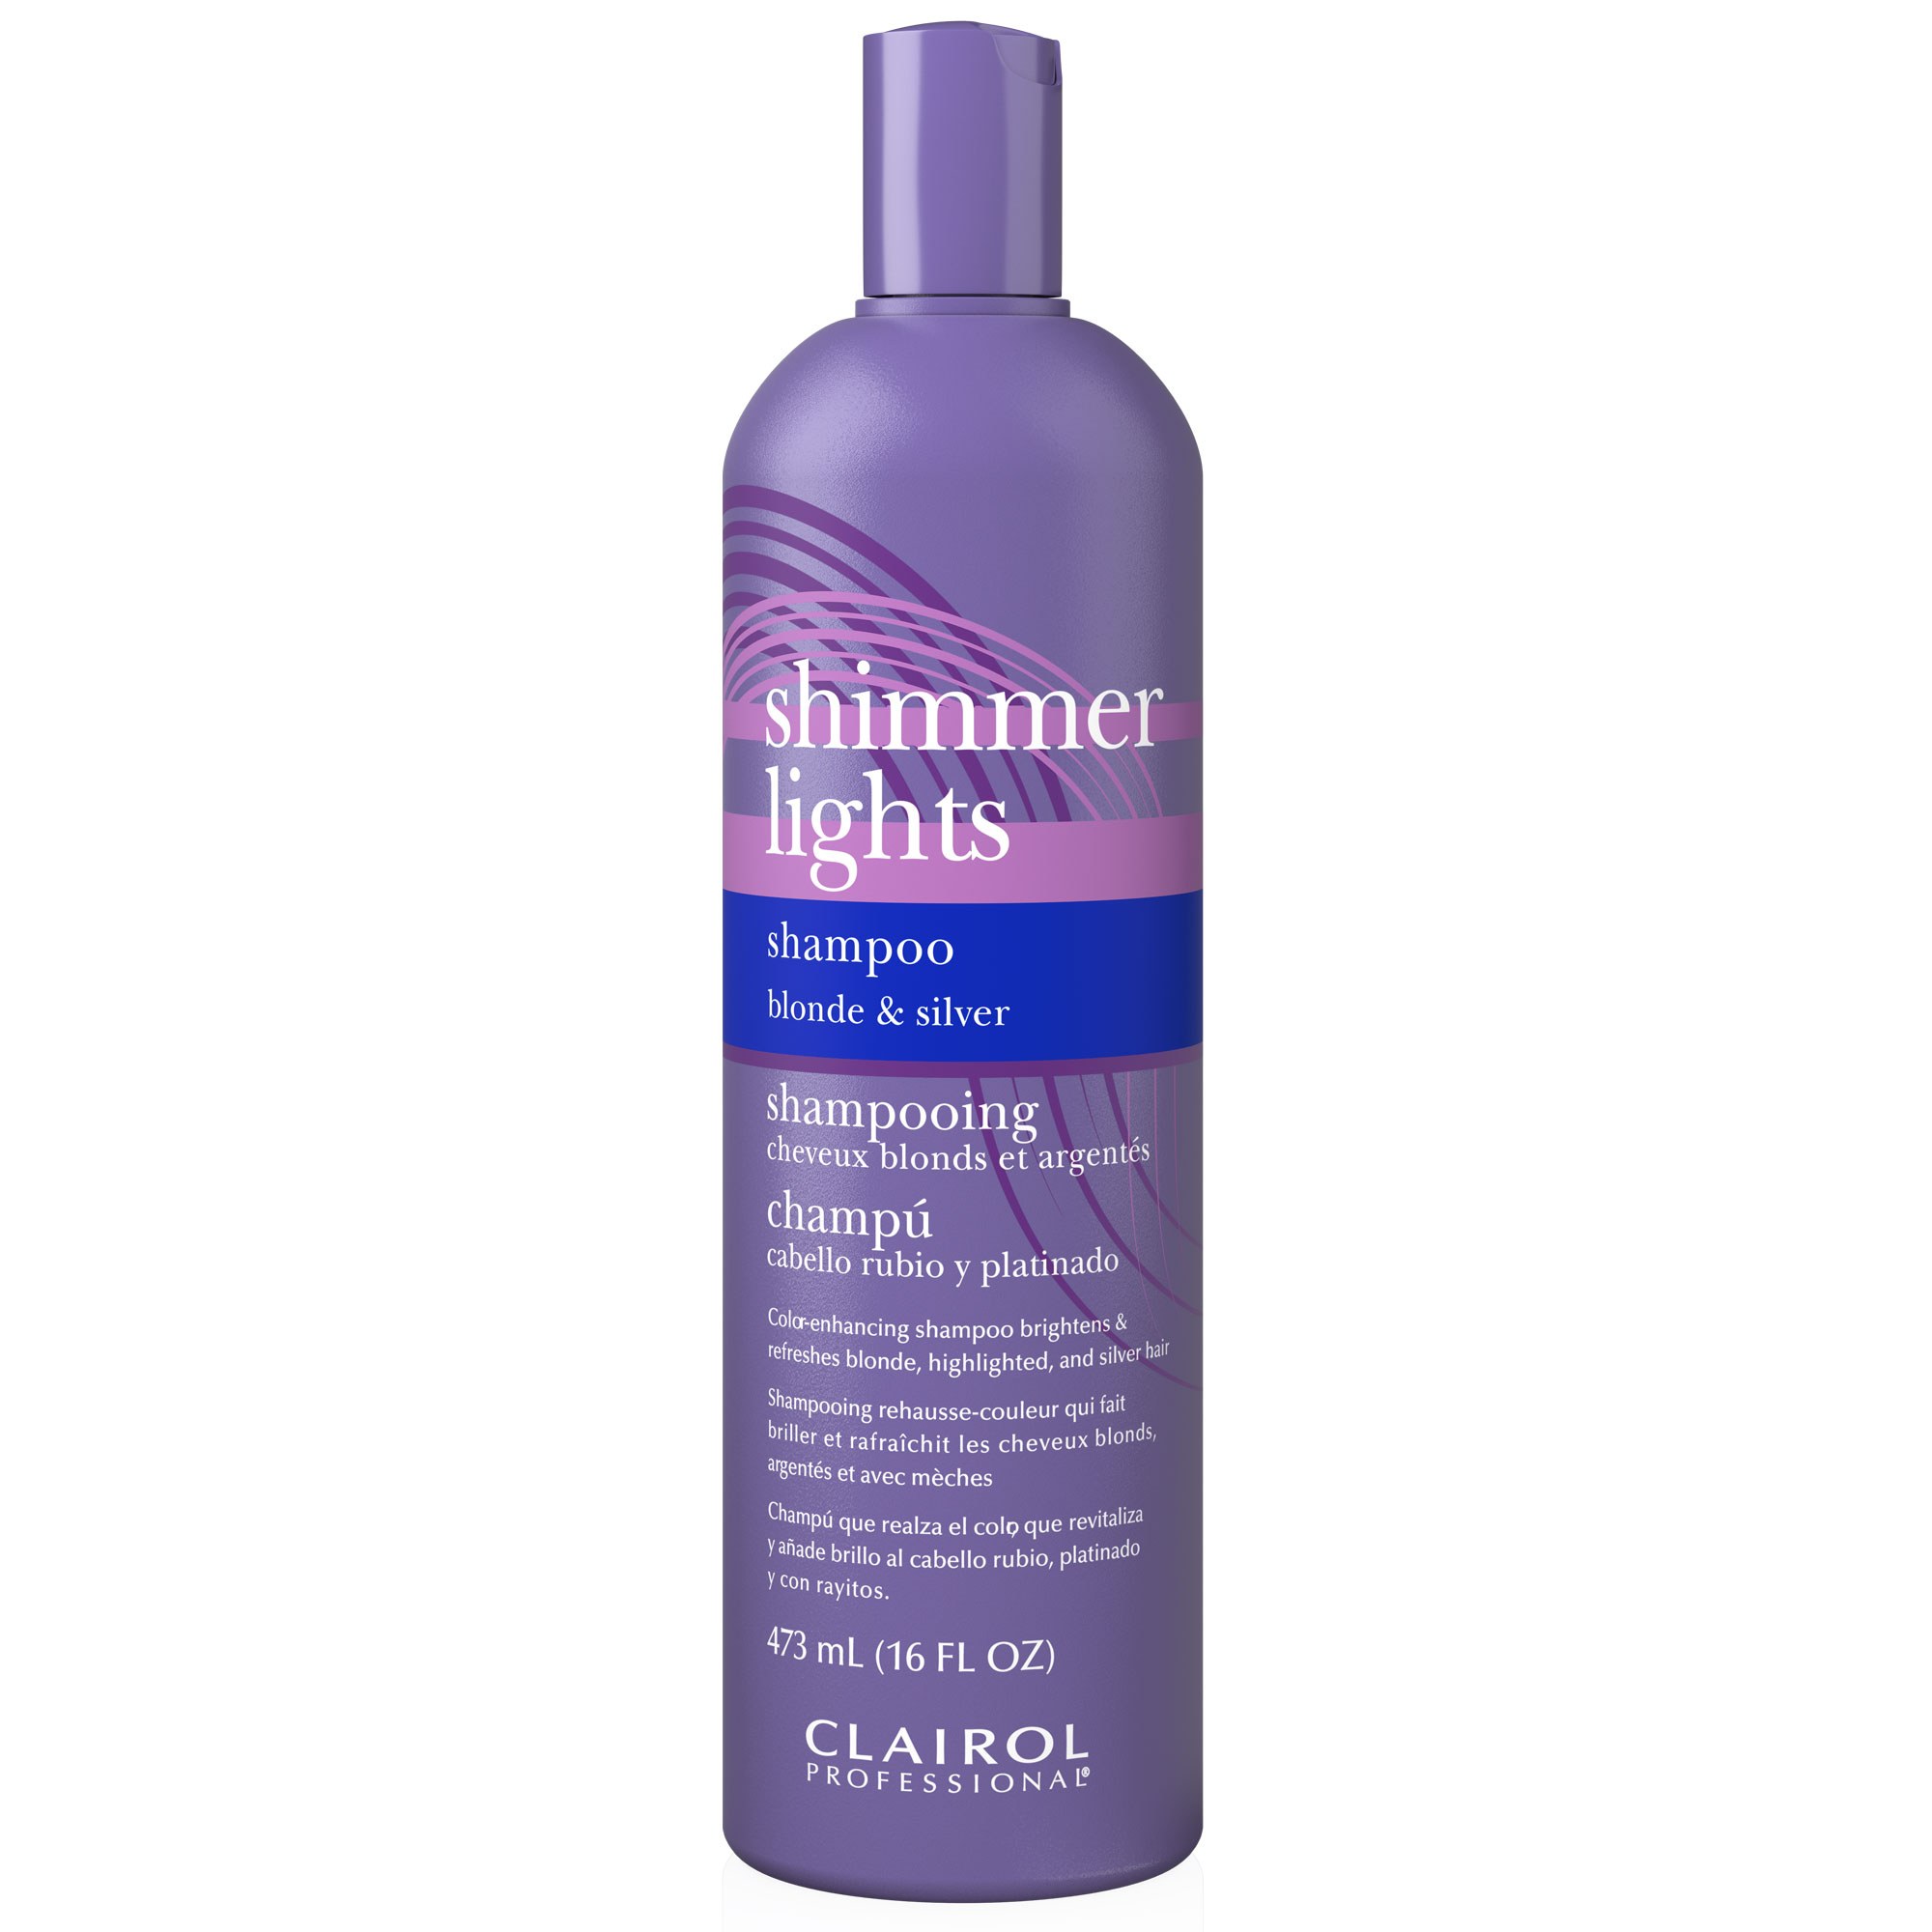 Clairol Shimmer Lights Shampoo for Blonde & Silver Hair